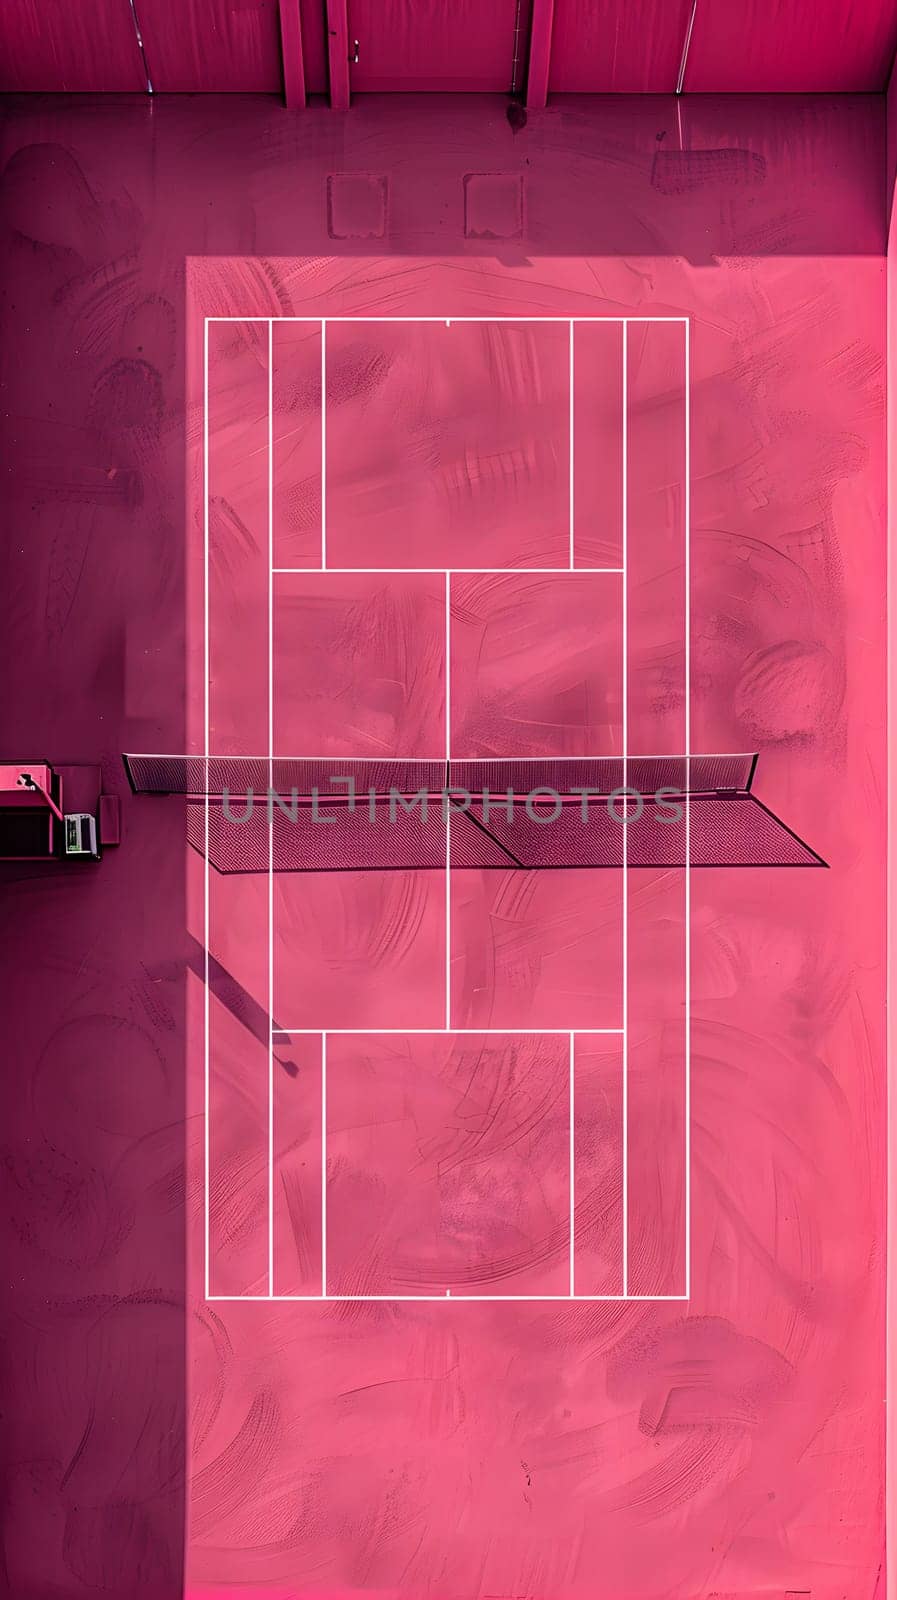 A rectangular tennis court viewed from above, situated in a pink room with violet walls. The room has a window, a door made of wood, and automotive lighting